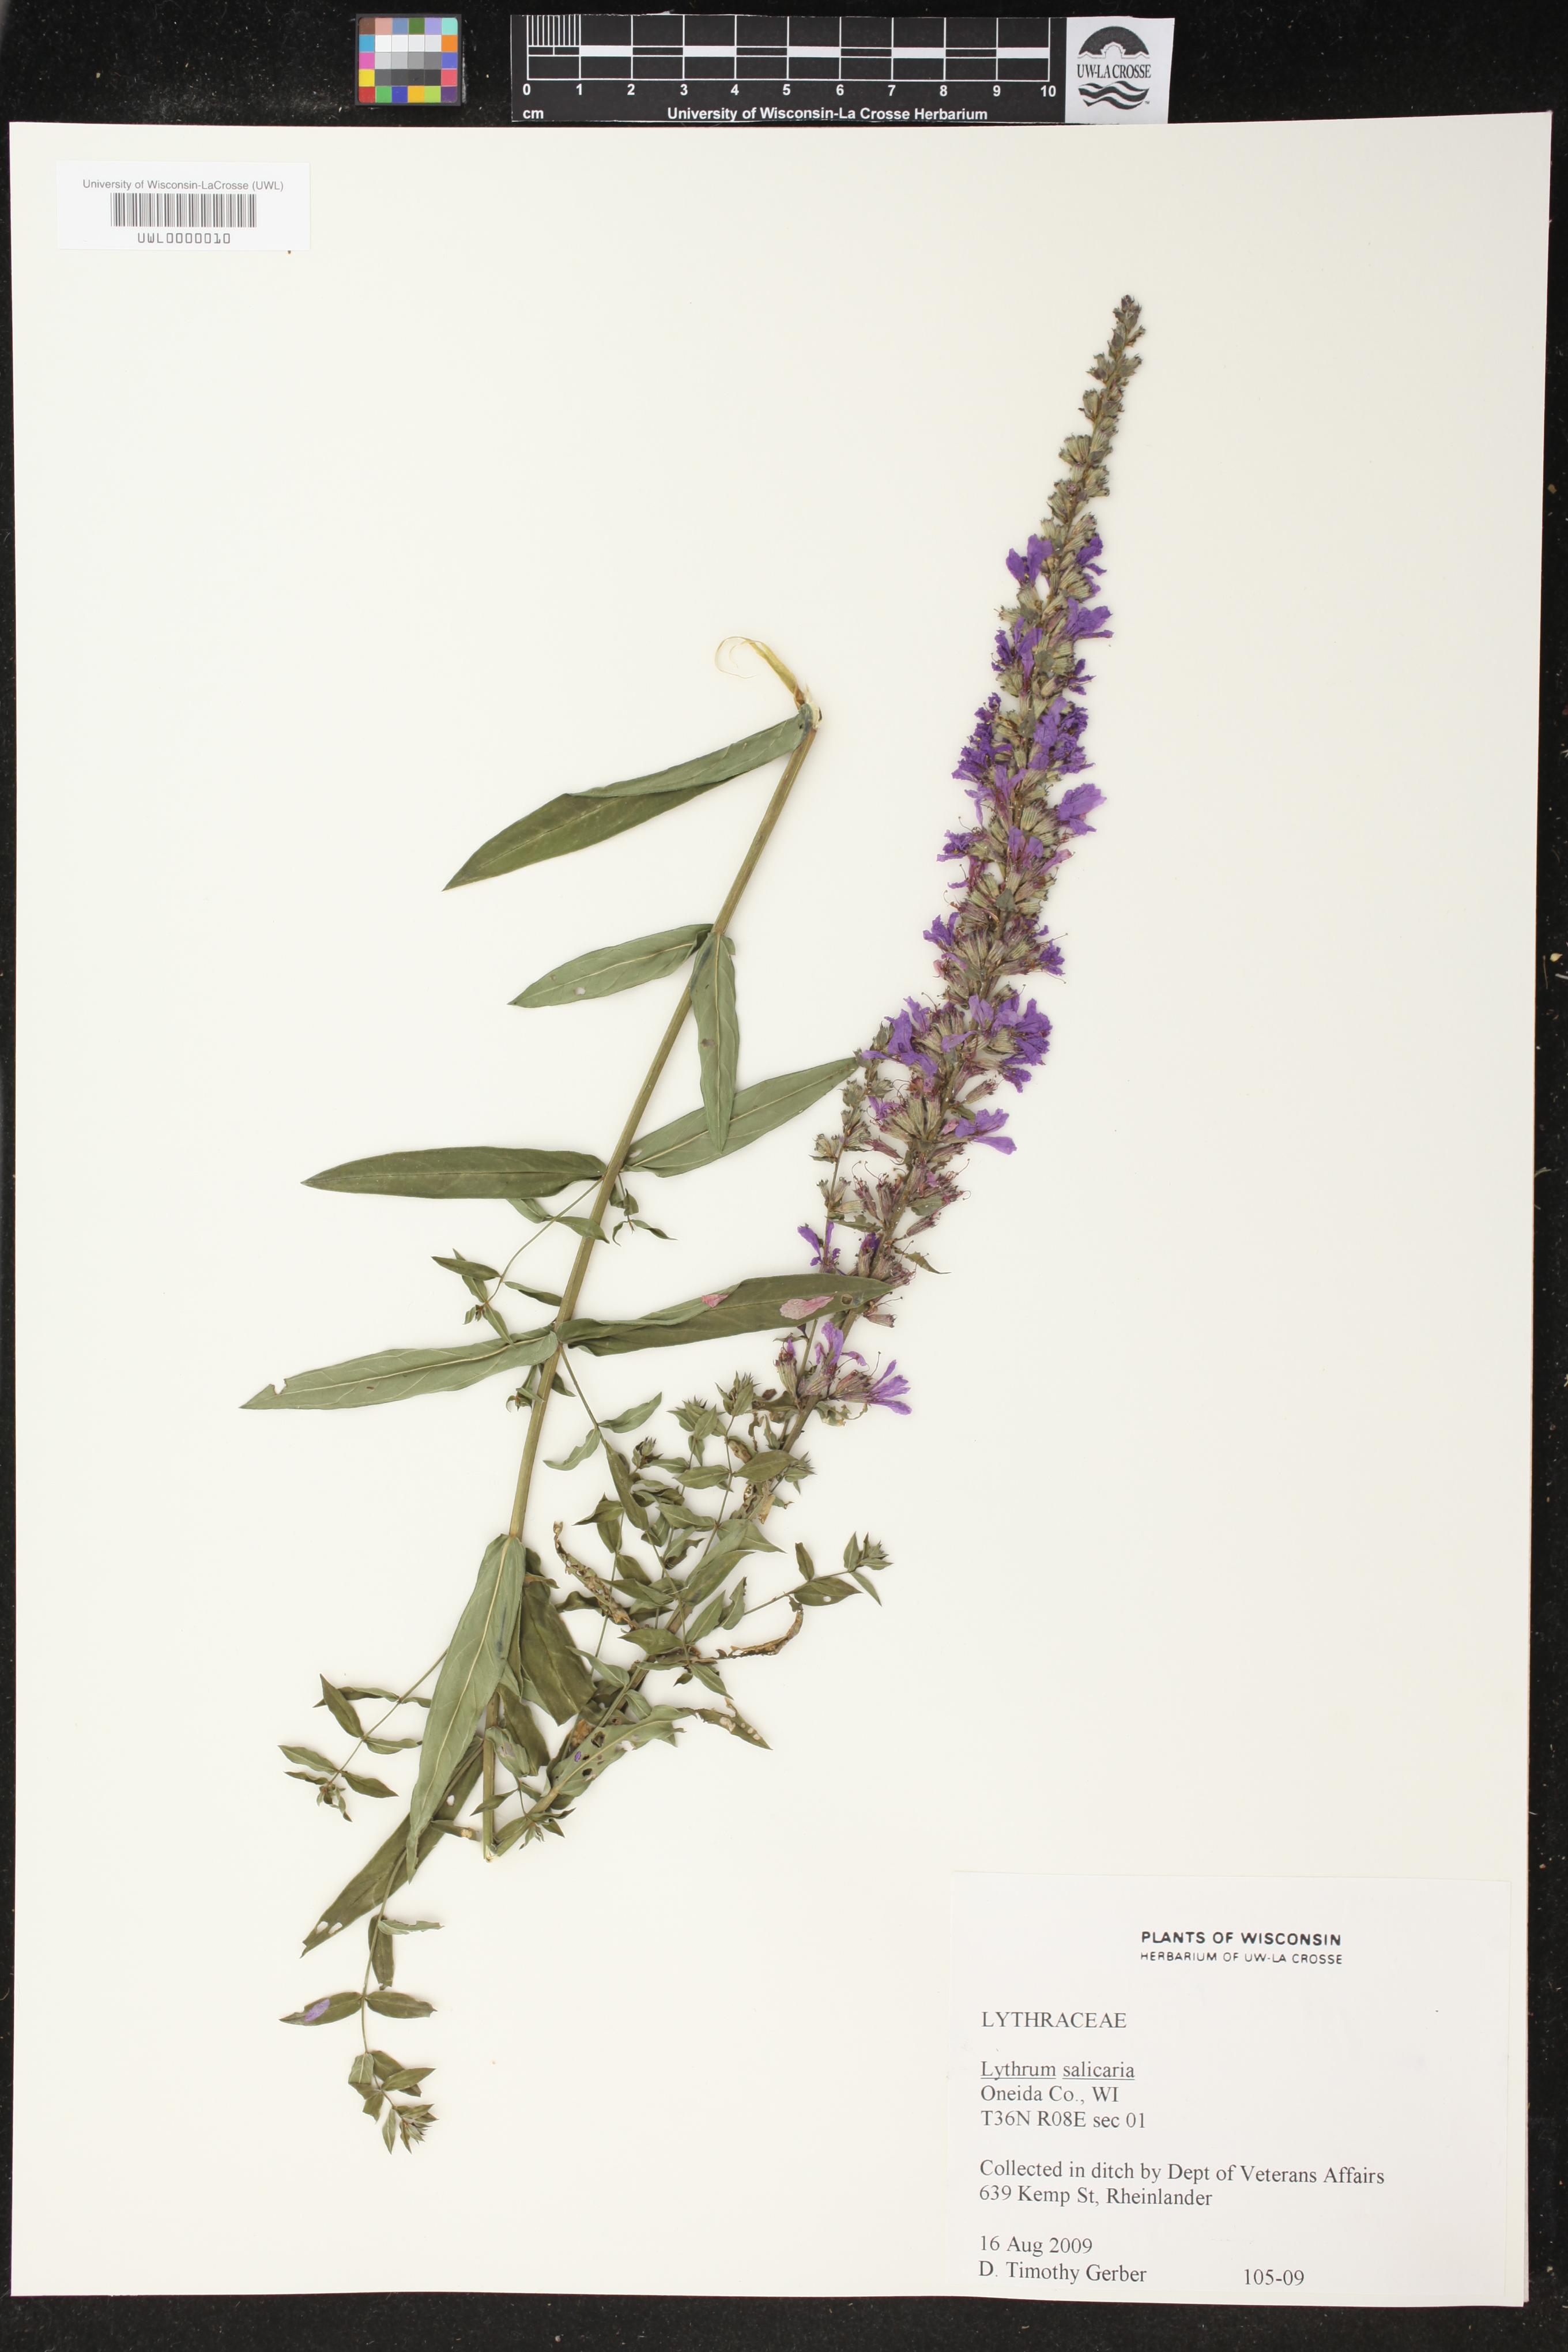 Purple Loosestrife specimen collected in ditch by the Department of Veterans Affairs on Kemp Street in Rheinlander  on August 16, 2009.